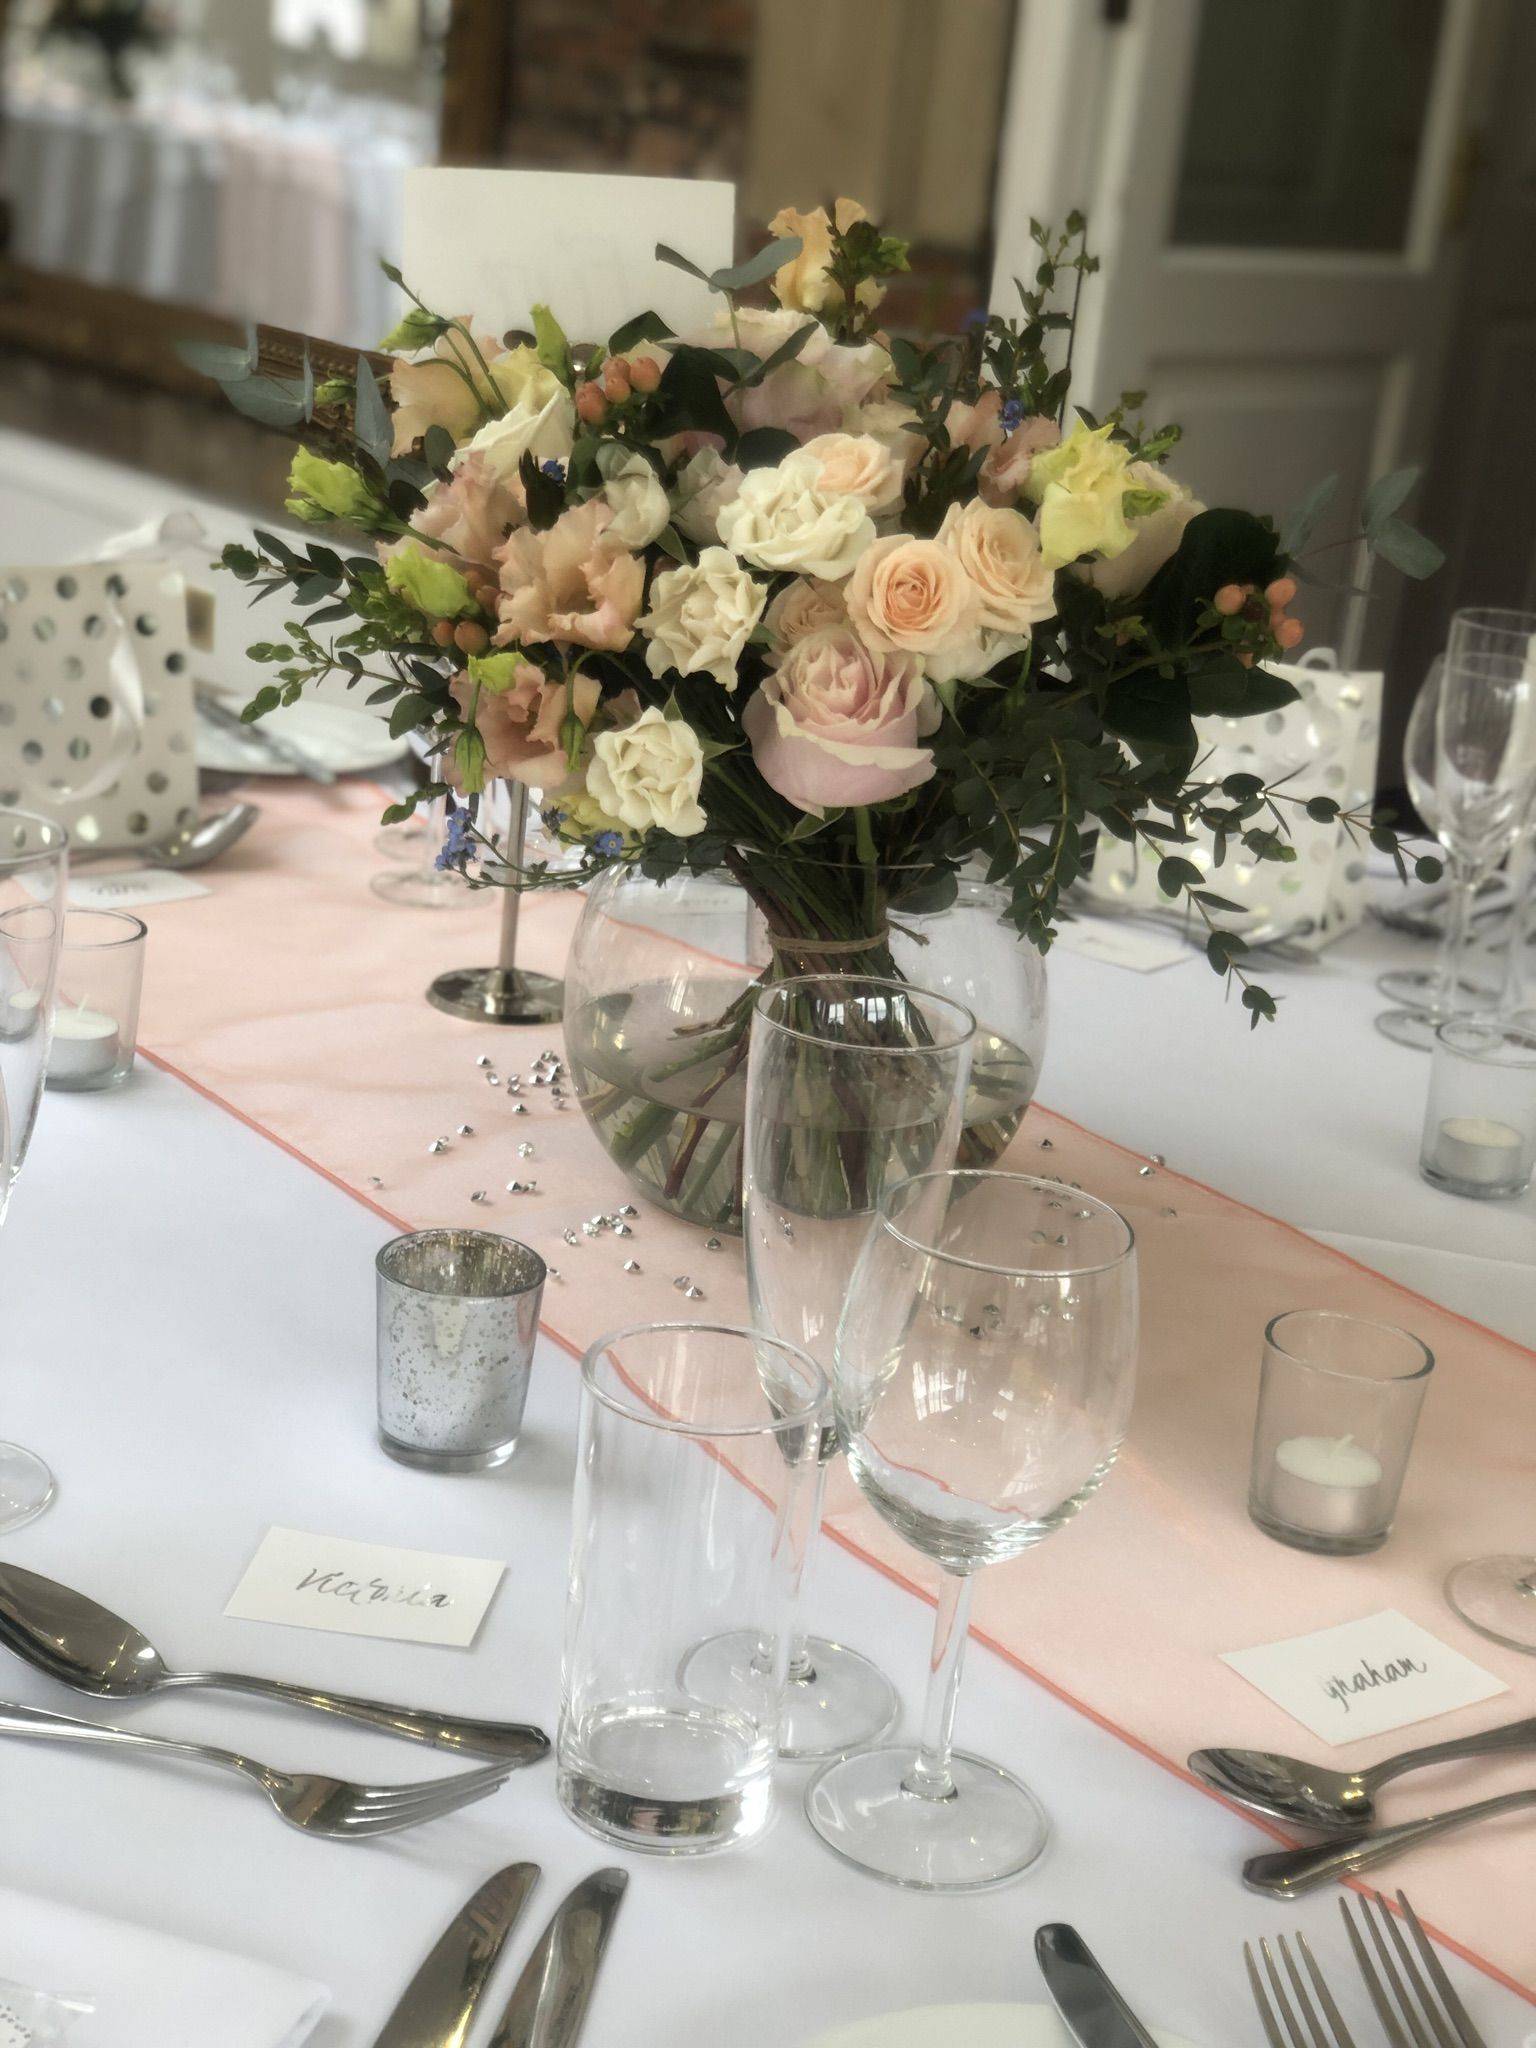 a table with a vase of flowers and silverware.